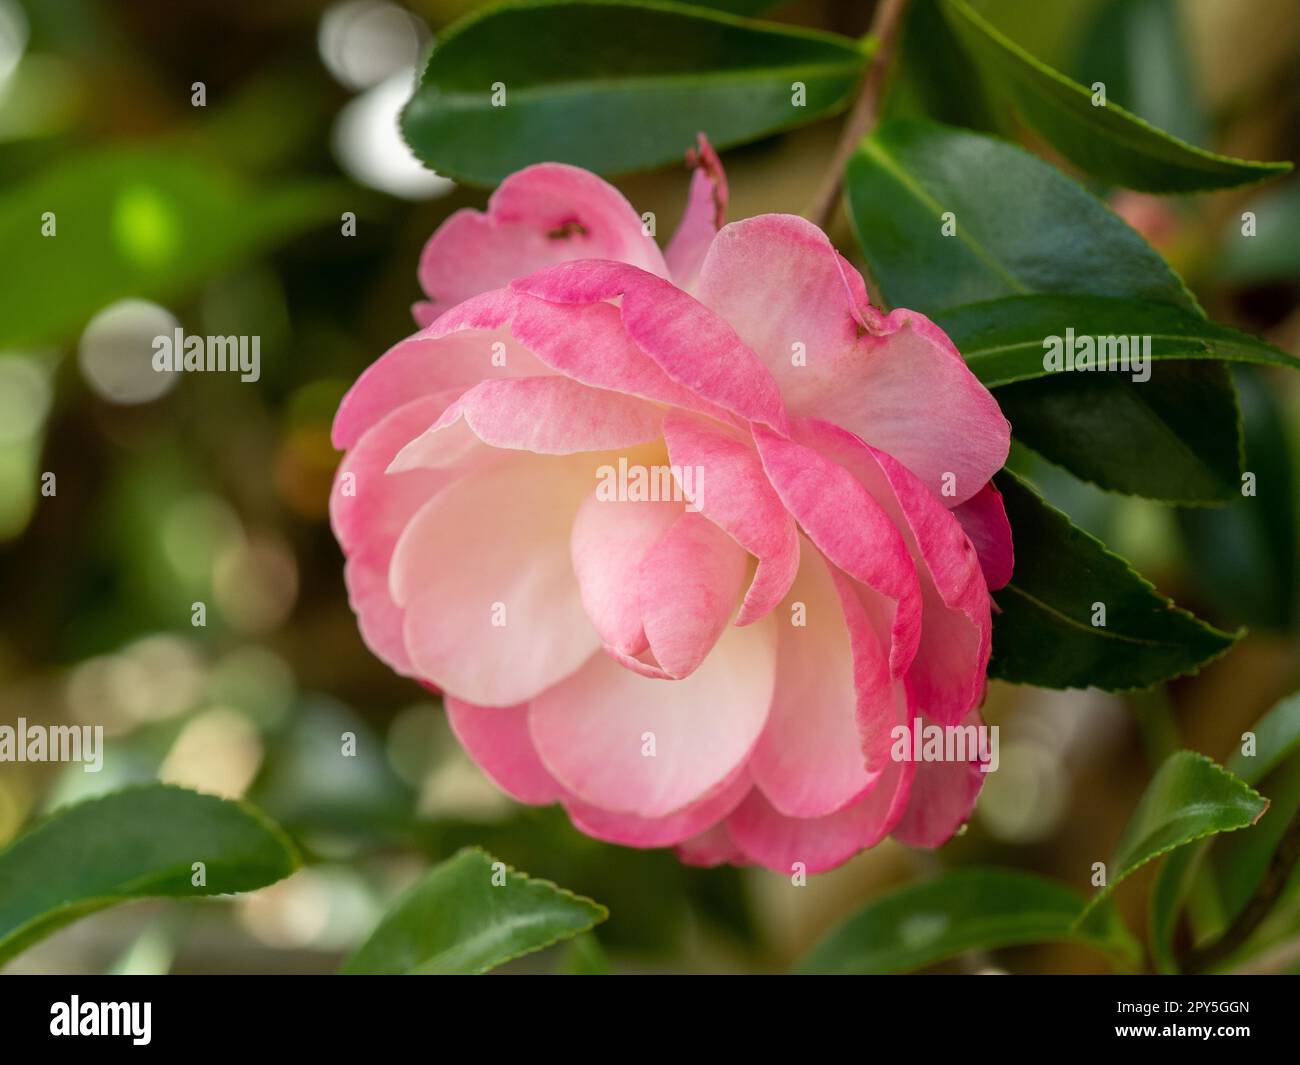 Flowers in the garden, Camellia sasanqua Paradise Blush flower, pretty pale to dark pink petals and green leaves Stock Photo